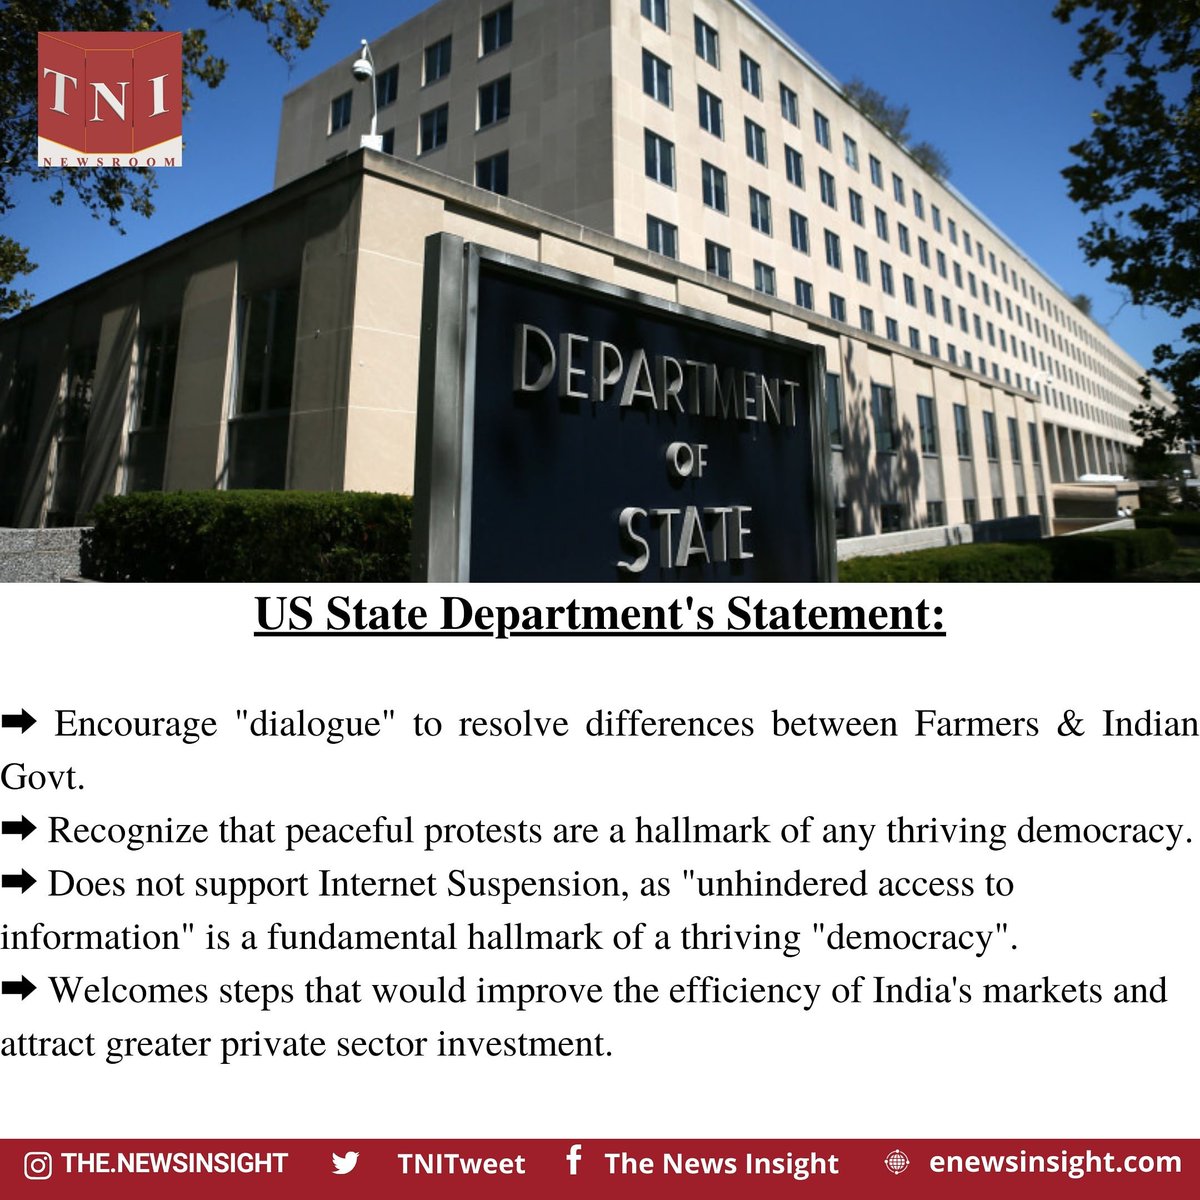 US Government hints at supporting Indian farm laws while expressing concern over blocked internet access amid ongoing protests.

#USA #India #farmlaws #farmersprotest #internetblock #protest #biden #modi #news